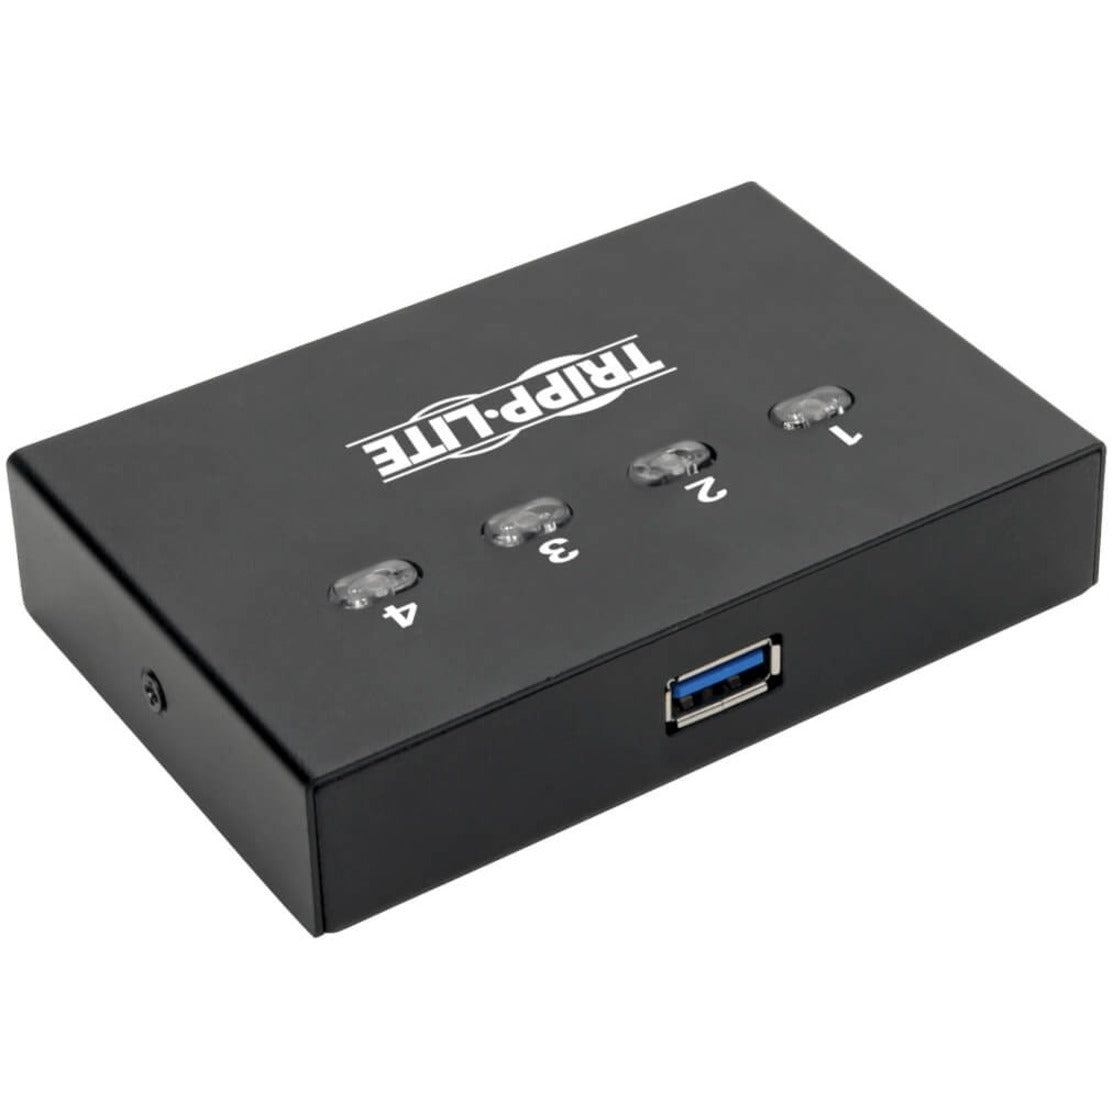 Tripp Lite U359-004 4-Port USB 3.0 Peripheral Sharing Switch - SuperSpeed, Convenient USB Switch for Multiple Devices